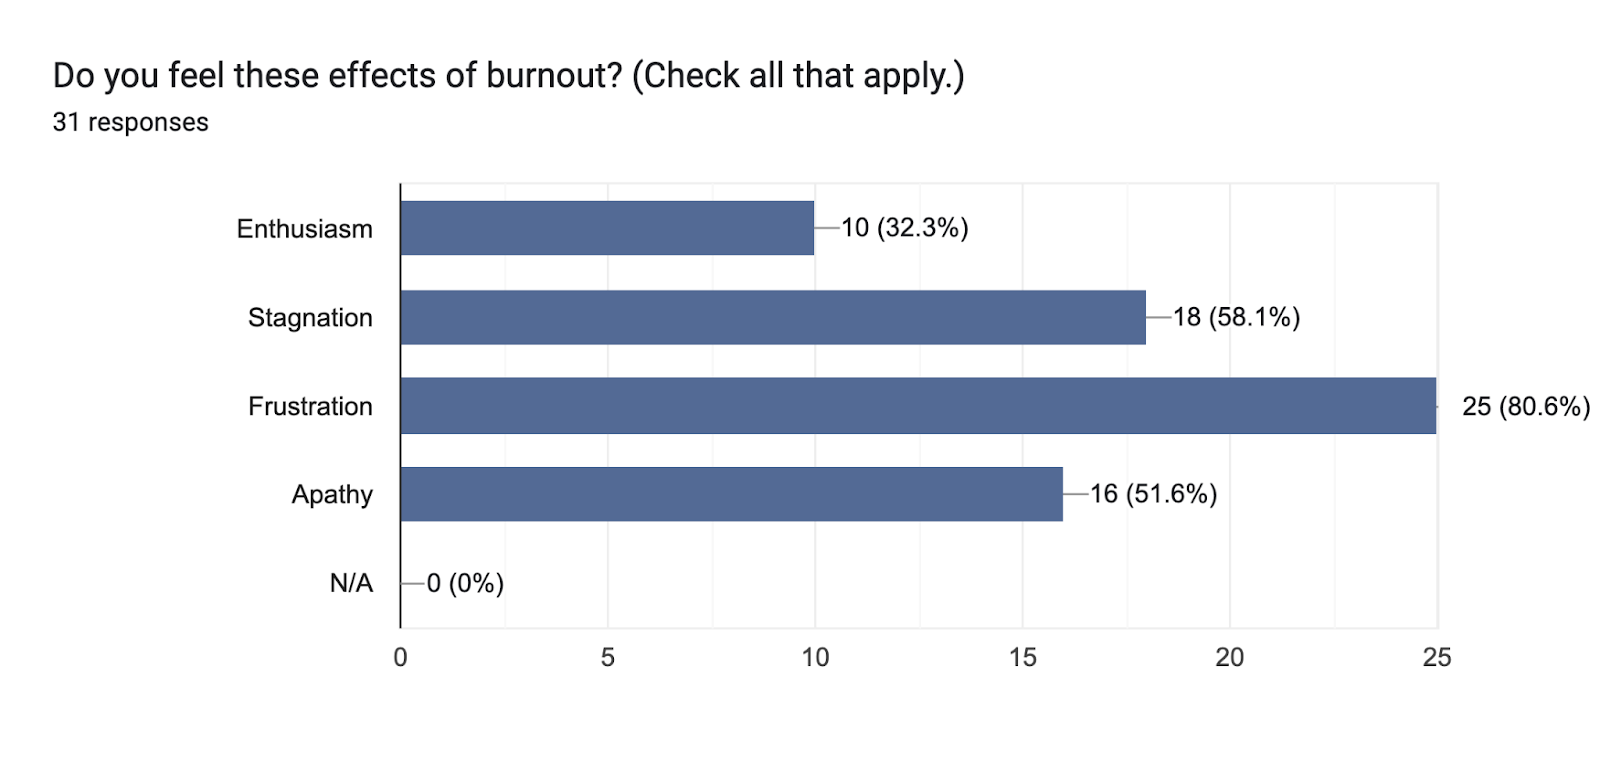 Forms response chart. Question title: Do you feel these effects of burnout? (Check all that apply.). Number of responses: 31 responses.